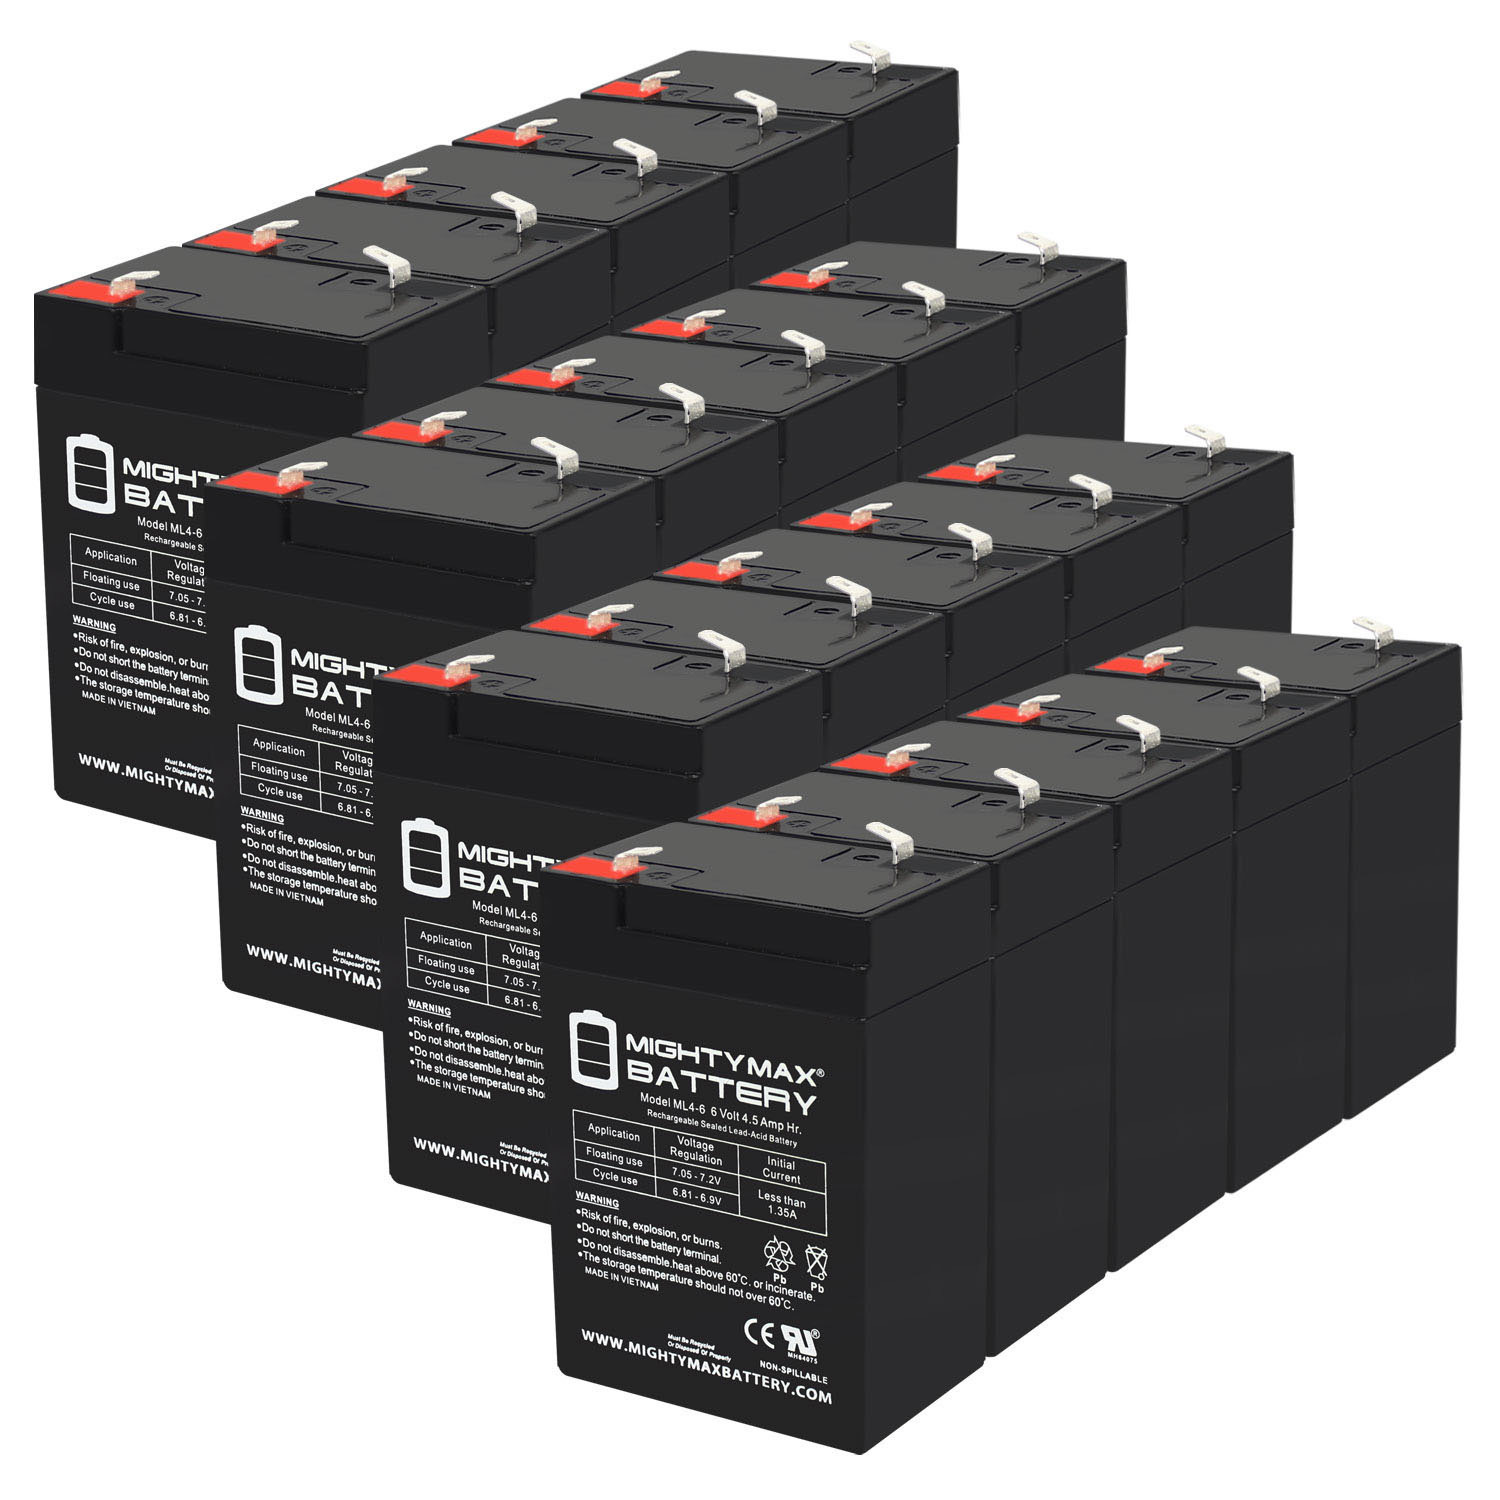 6V 4.5AH SLA Replacement Battery for Baxter Healthcare 522 Microate - 20 Pack